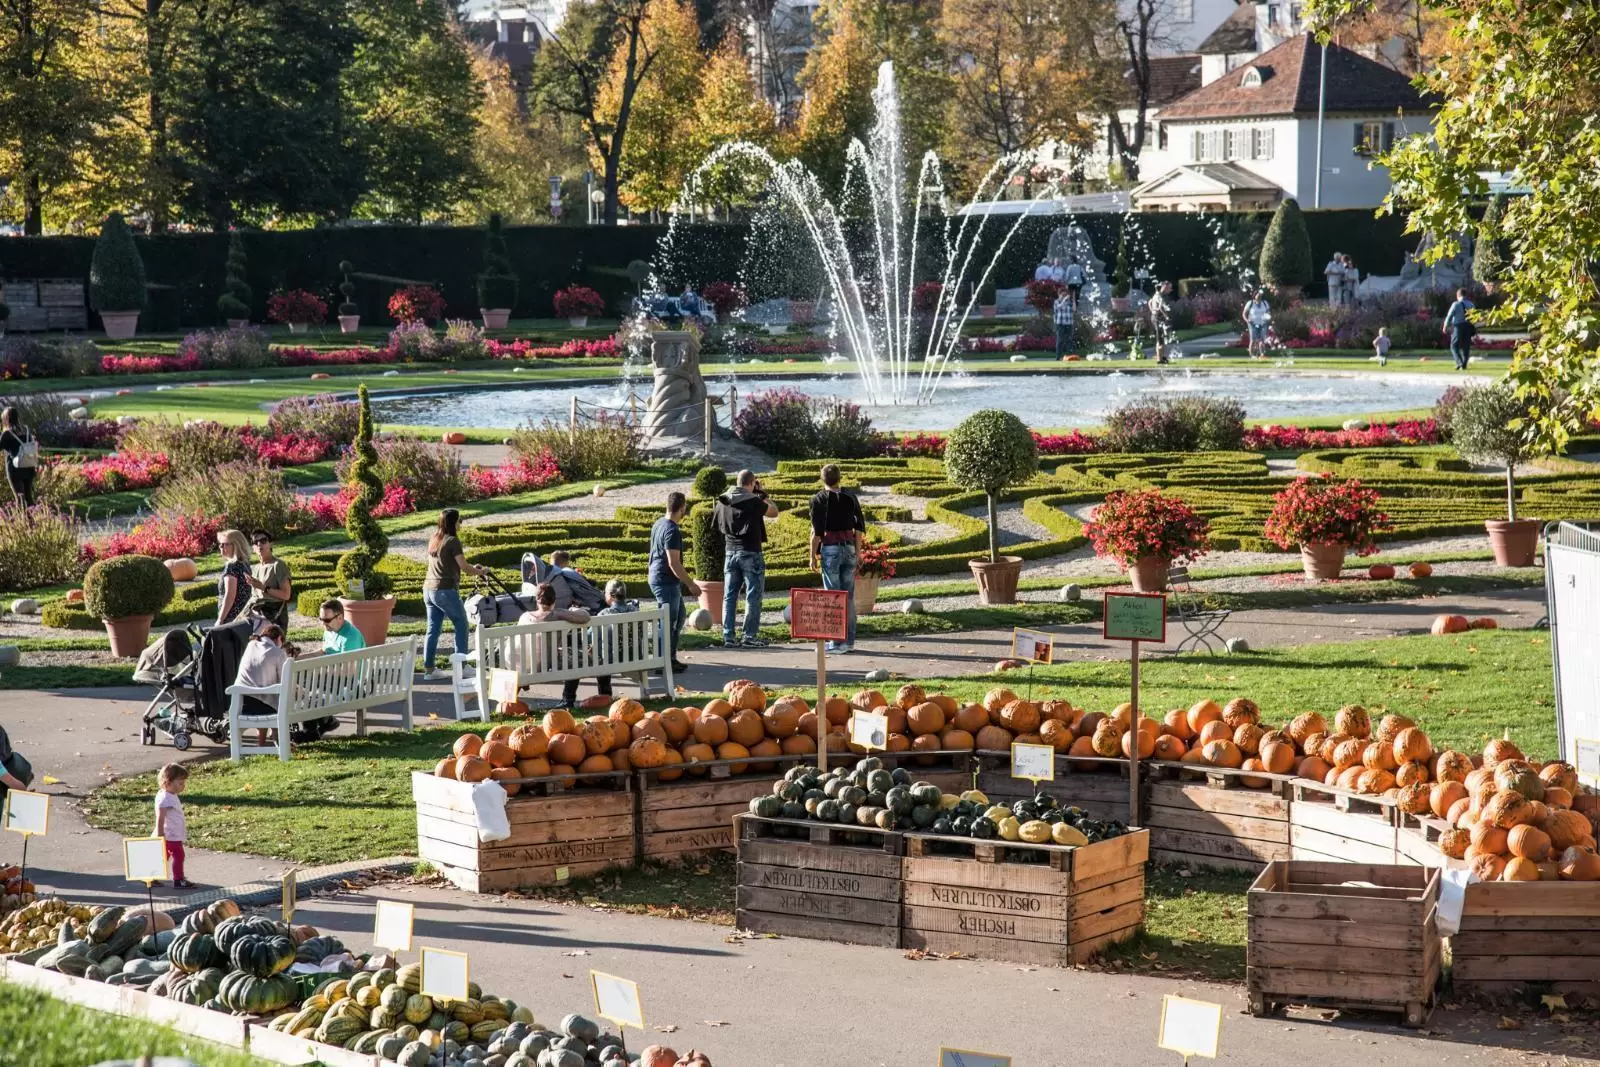 Experience autumn at the Ludwigsburg pumpkin exhibition